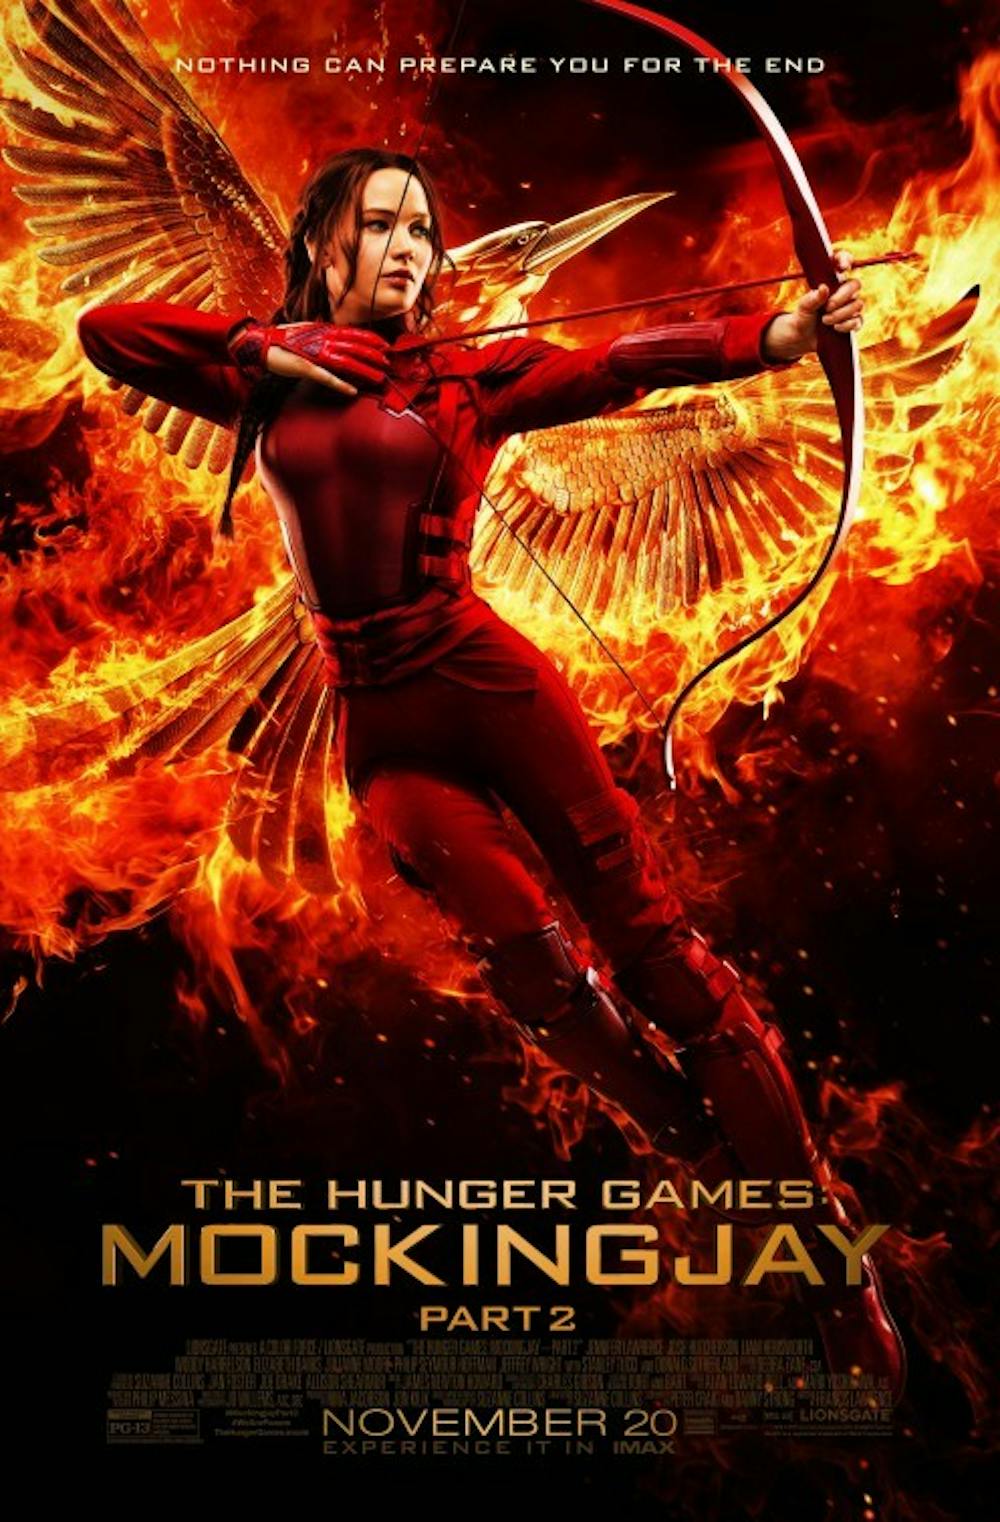 <p>“The Hunger Games: Mockingjay, Part 2” is the fourth movie in the series and was released in theaters on Nov. 20. The movie focuses on Katniss Everdeen bringing together an army against President Snow.&nbsp;<em>PHOTO COURTESY OF IMPAWARDS.COM</em></p>